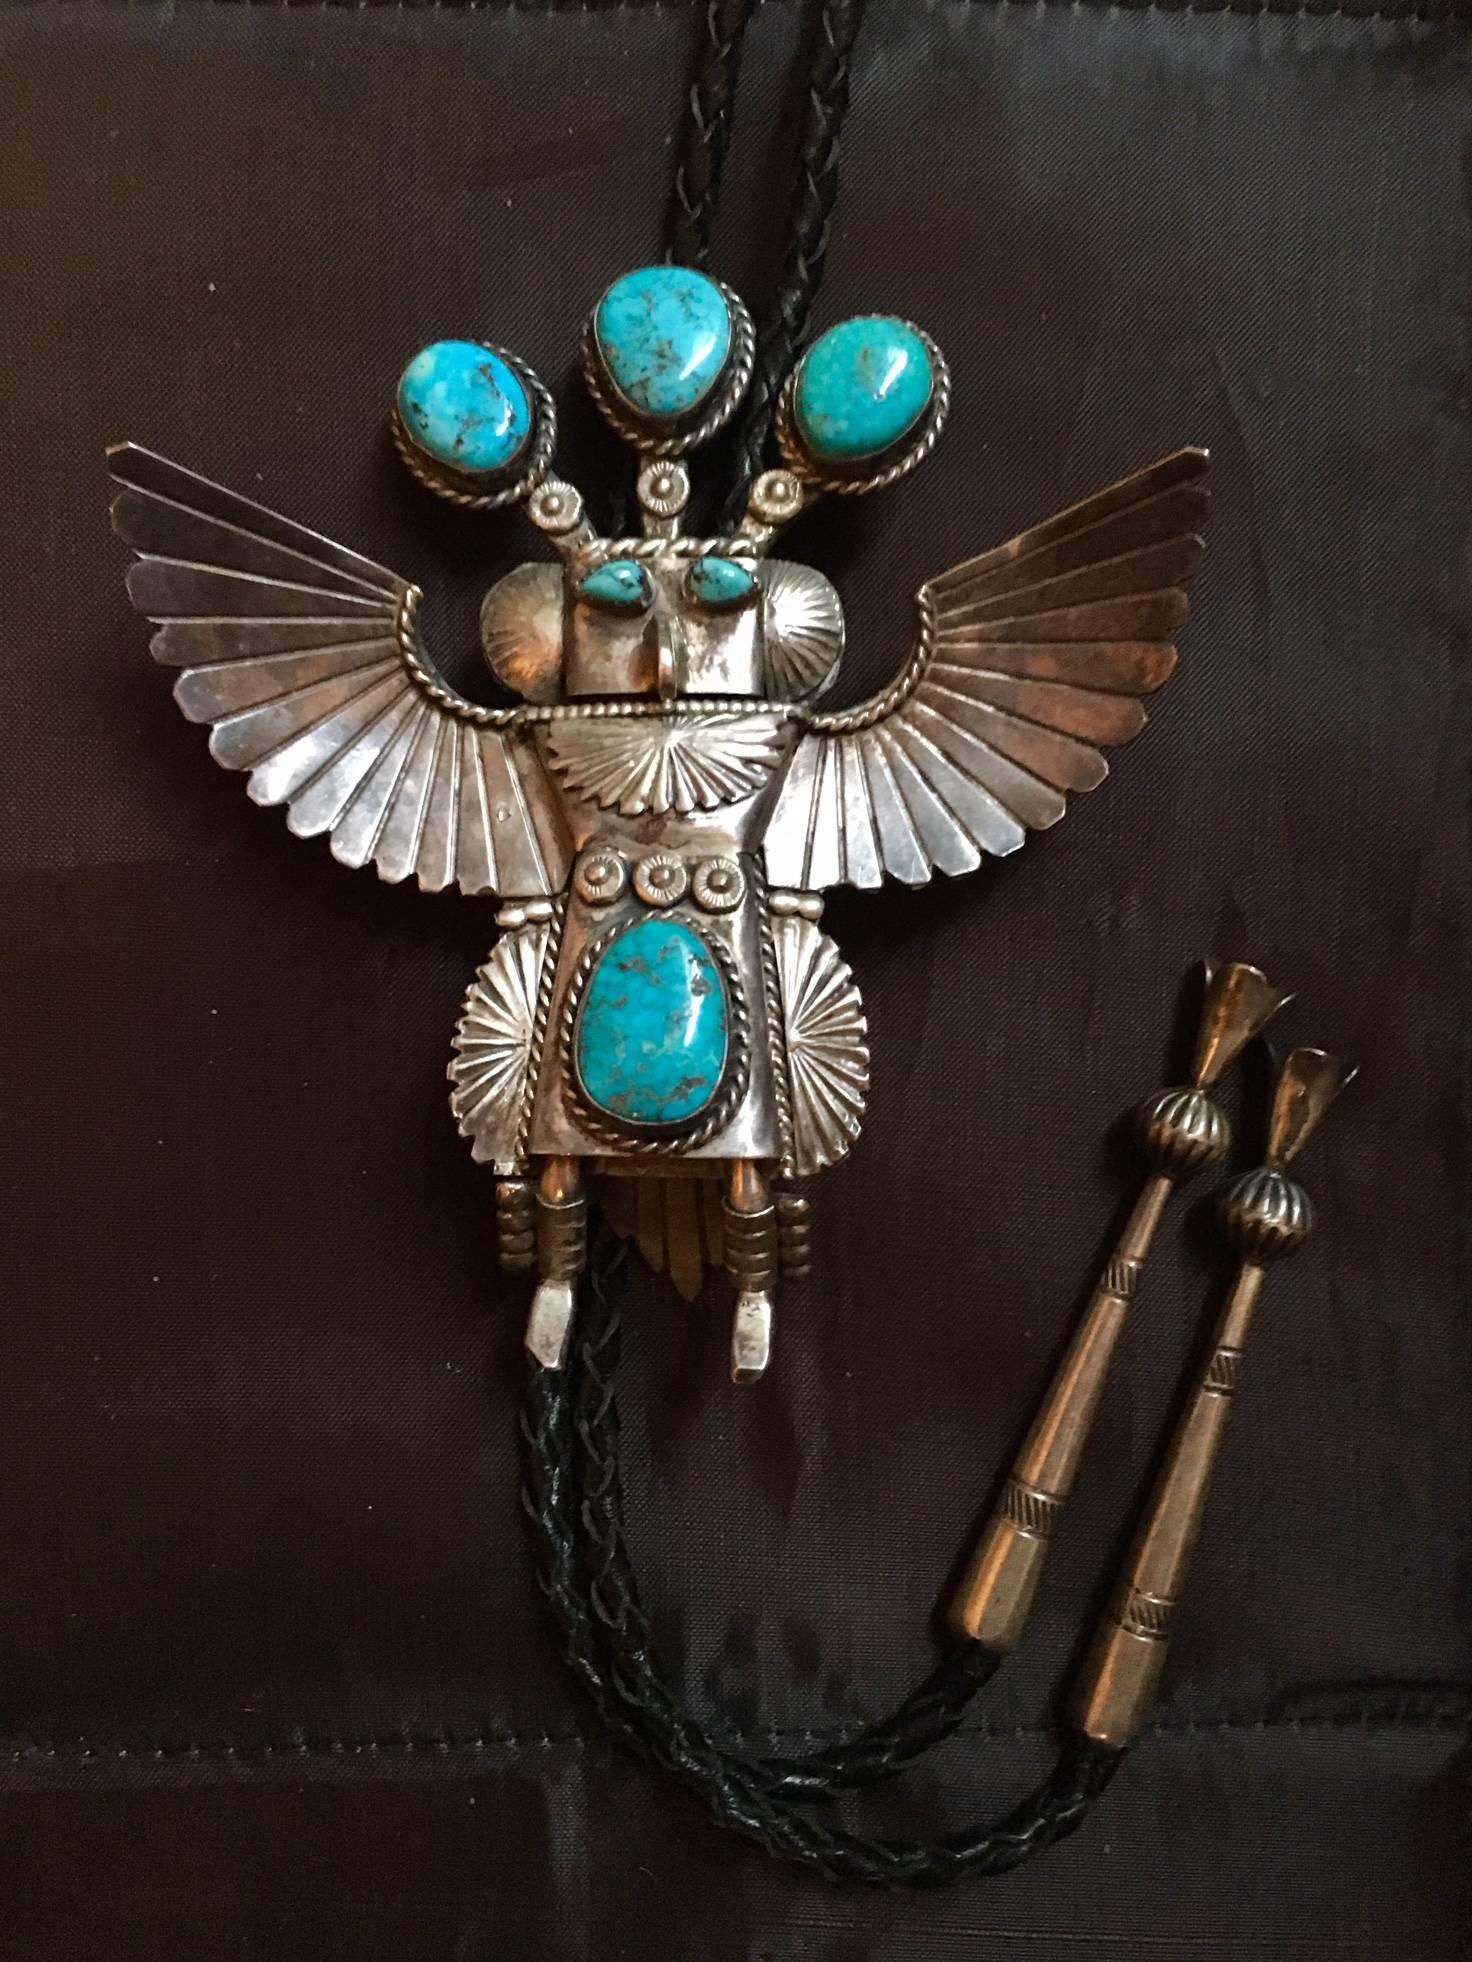 This is a Majestic Bolo tie, depicted as a Kachina, this bolo tie has four large irregular hand-cut turquoise (the largest measuring 3/4”) and two smaller stones set in a pie crust surround depicting eyes of the Indian. The main subject Indian with